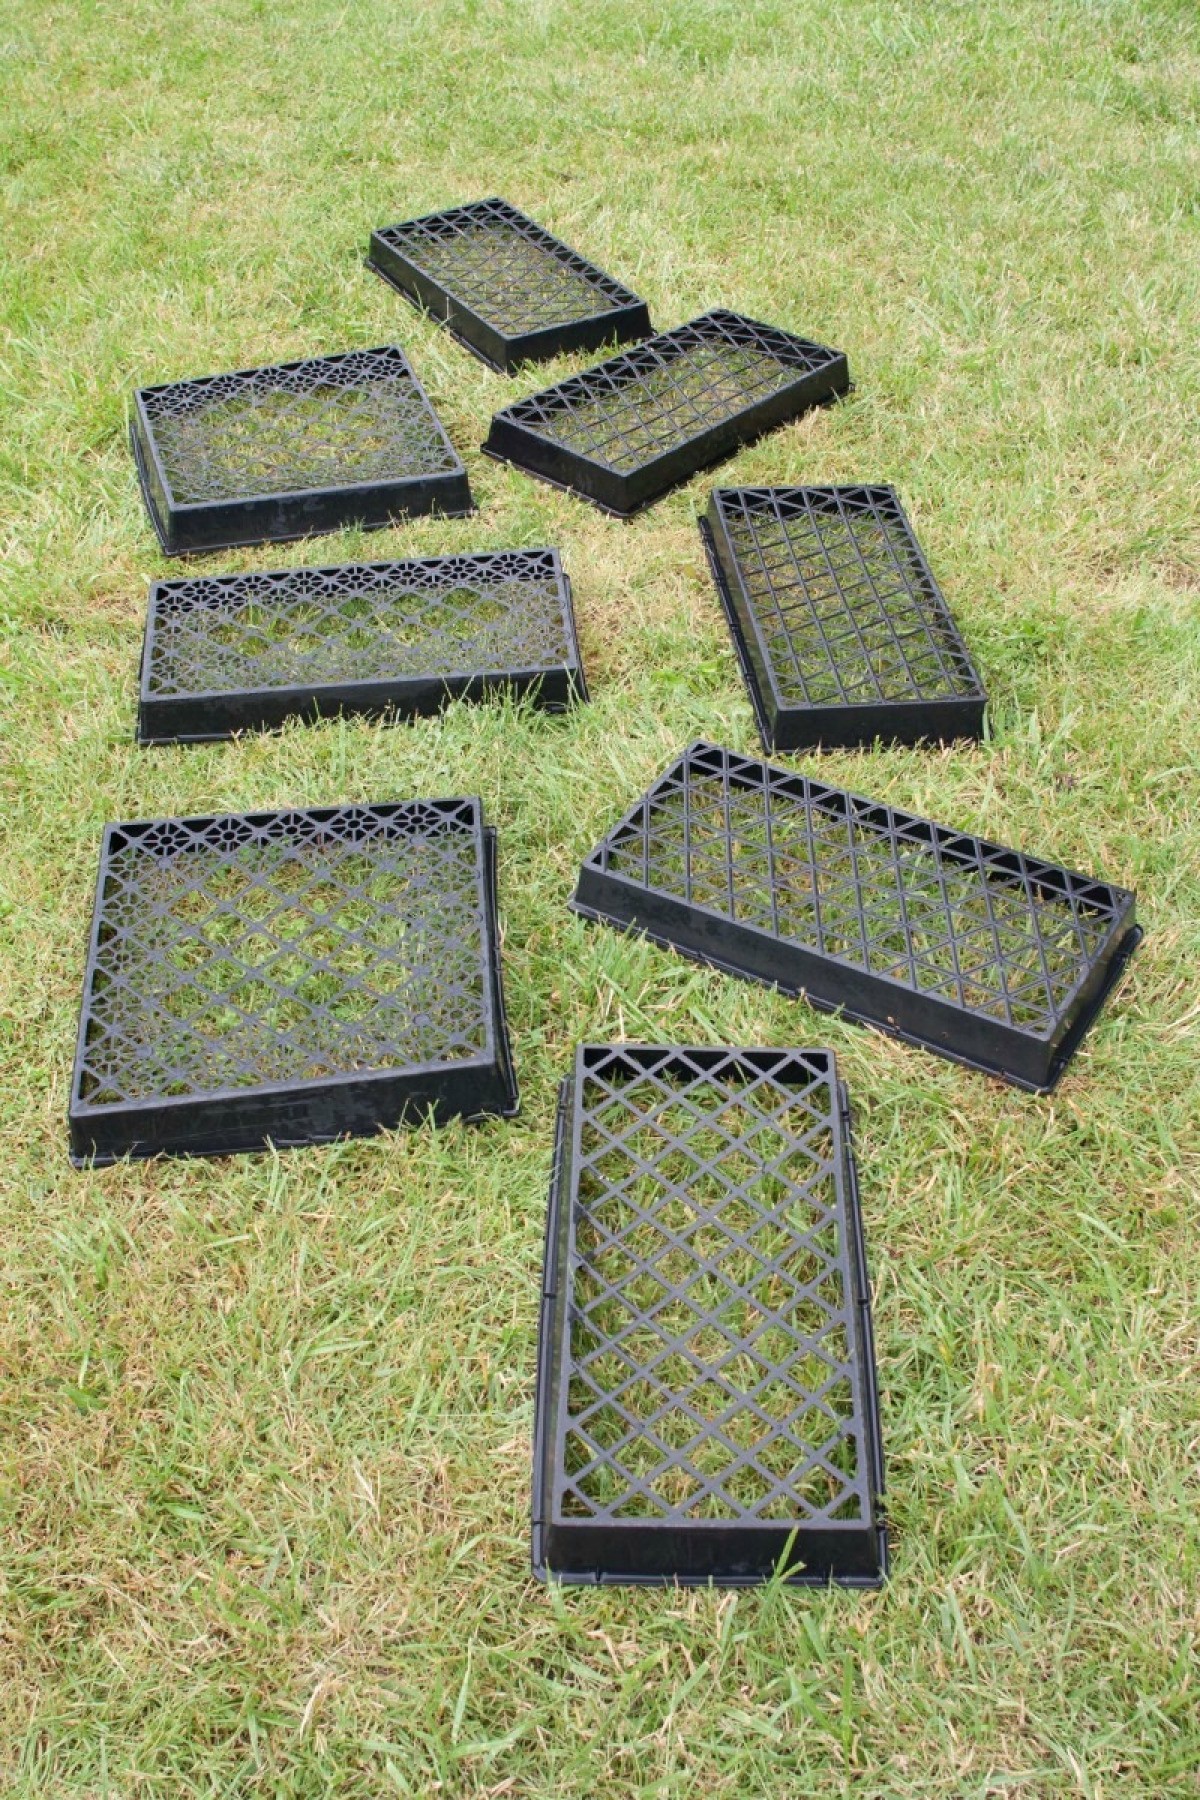 Uses for Plastic Plant Trays ThriftyFun